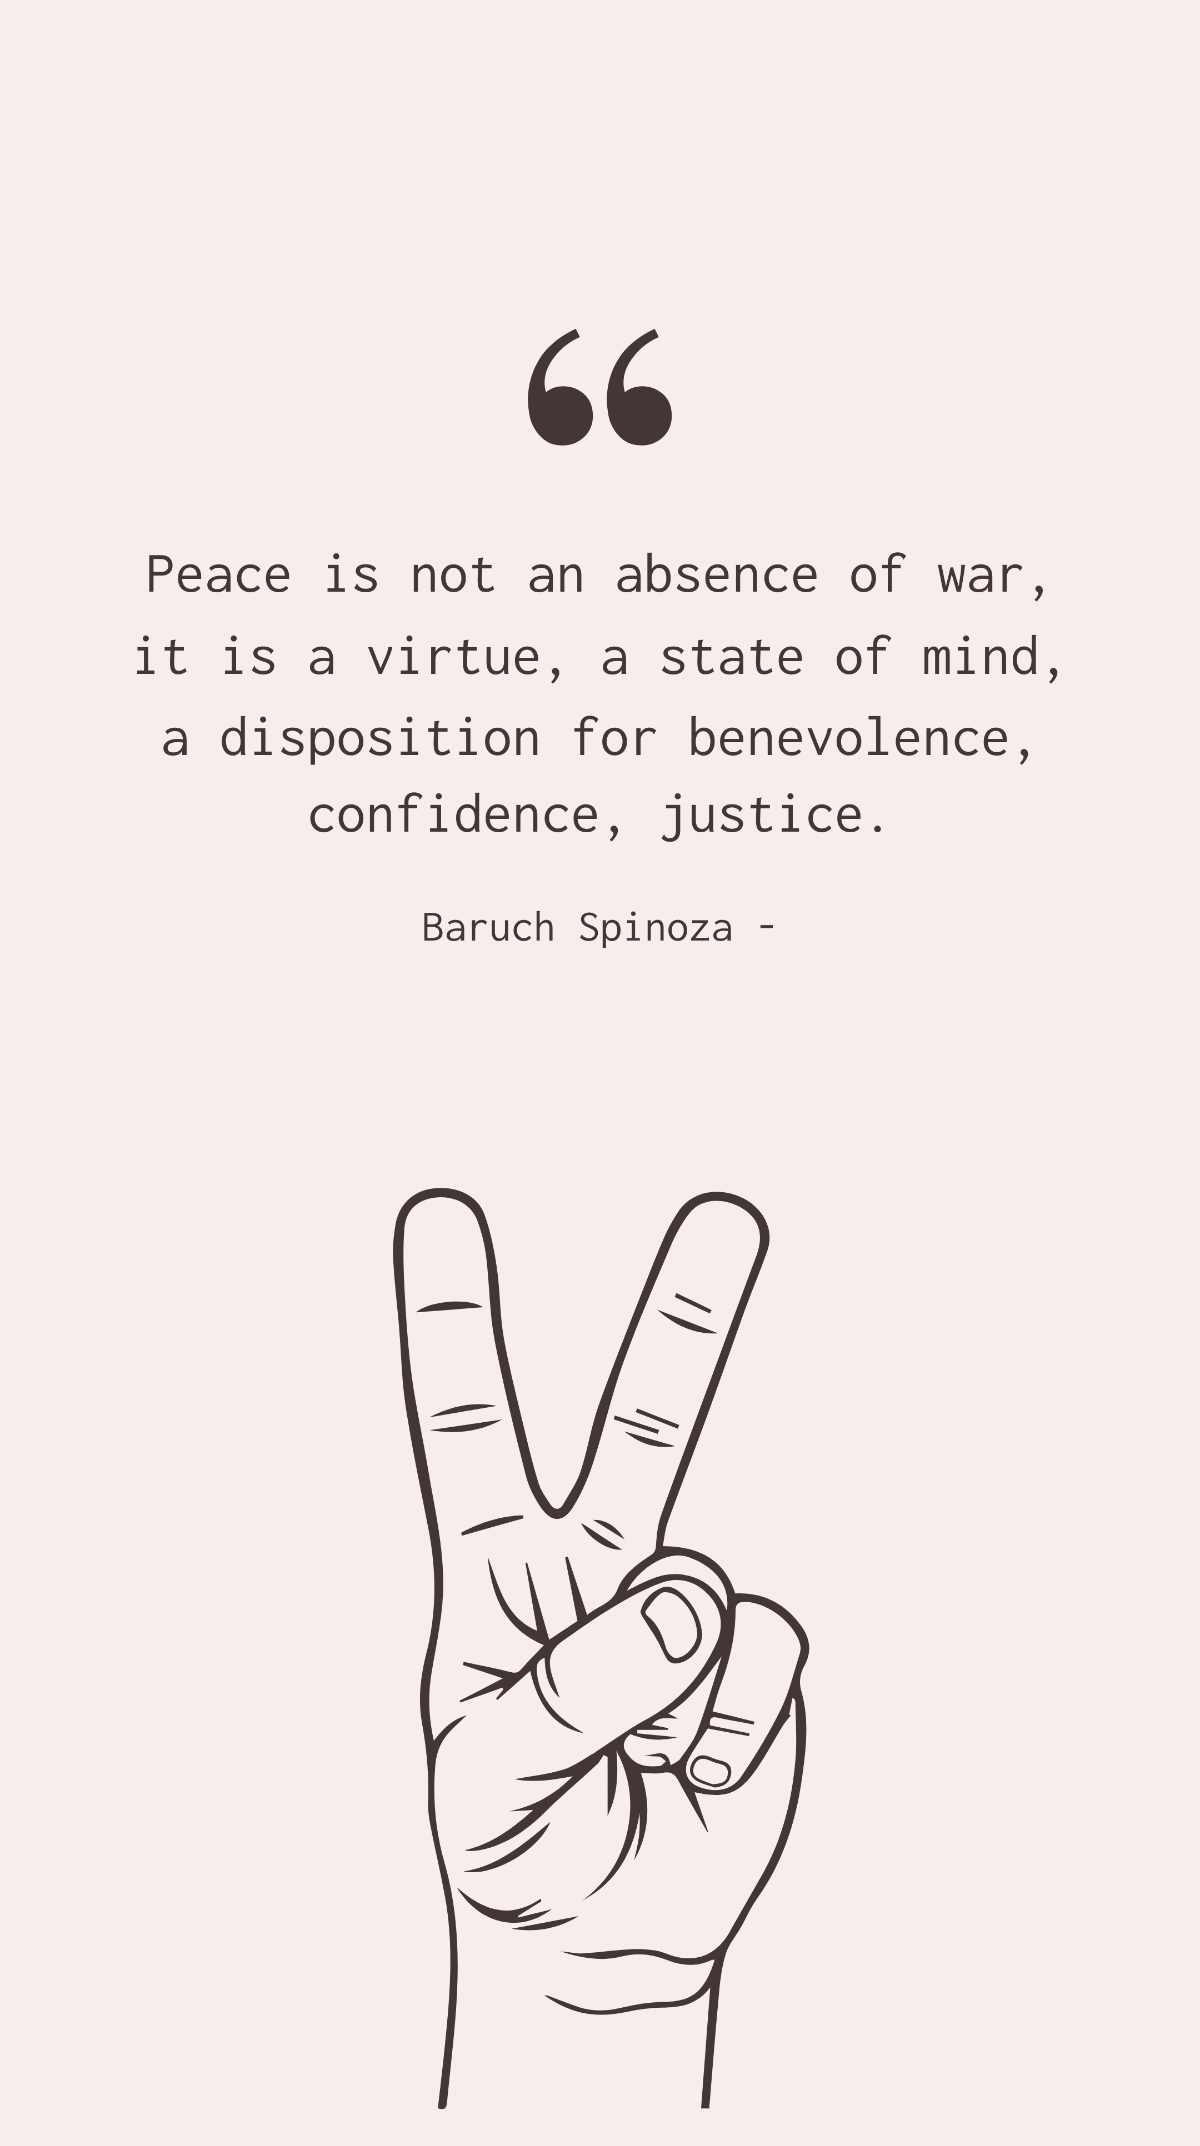 Baruch Spinoza - Peace is not an absence of war, it is a virtue, a state of mind, a disposition for benevolence, confidence, justice. Template